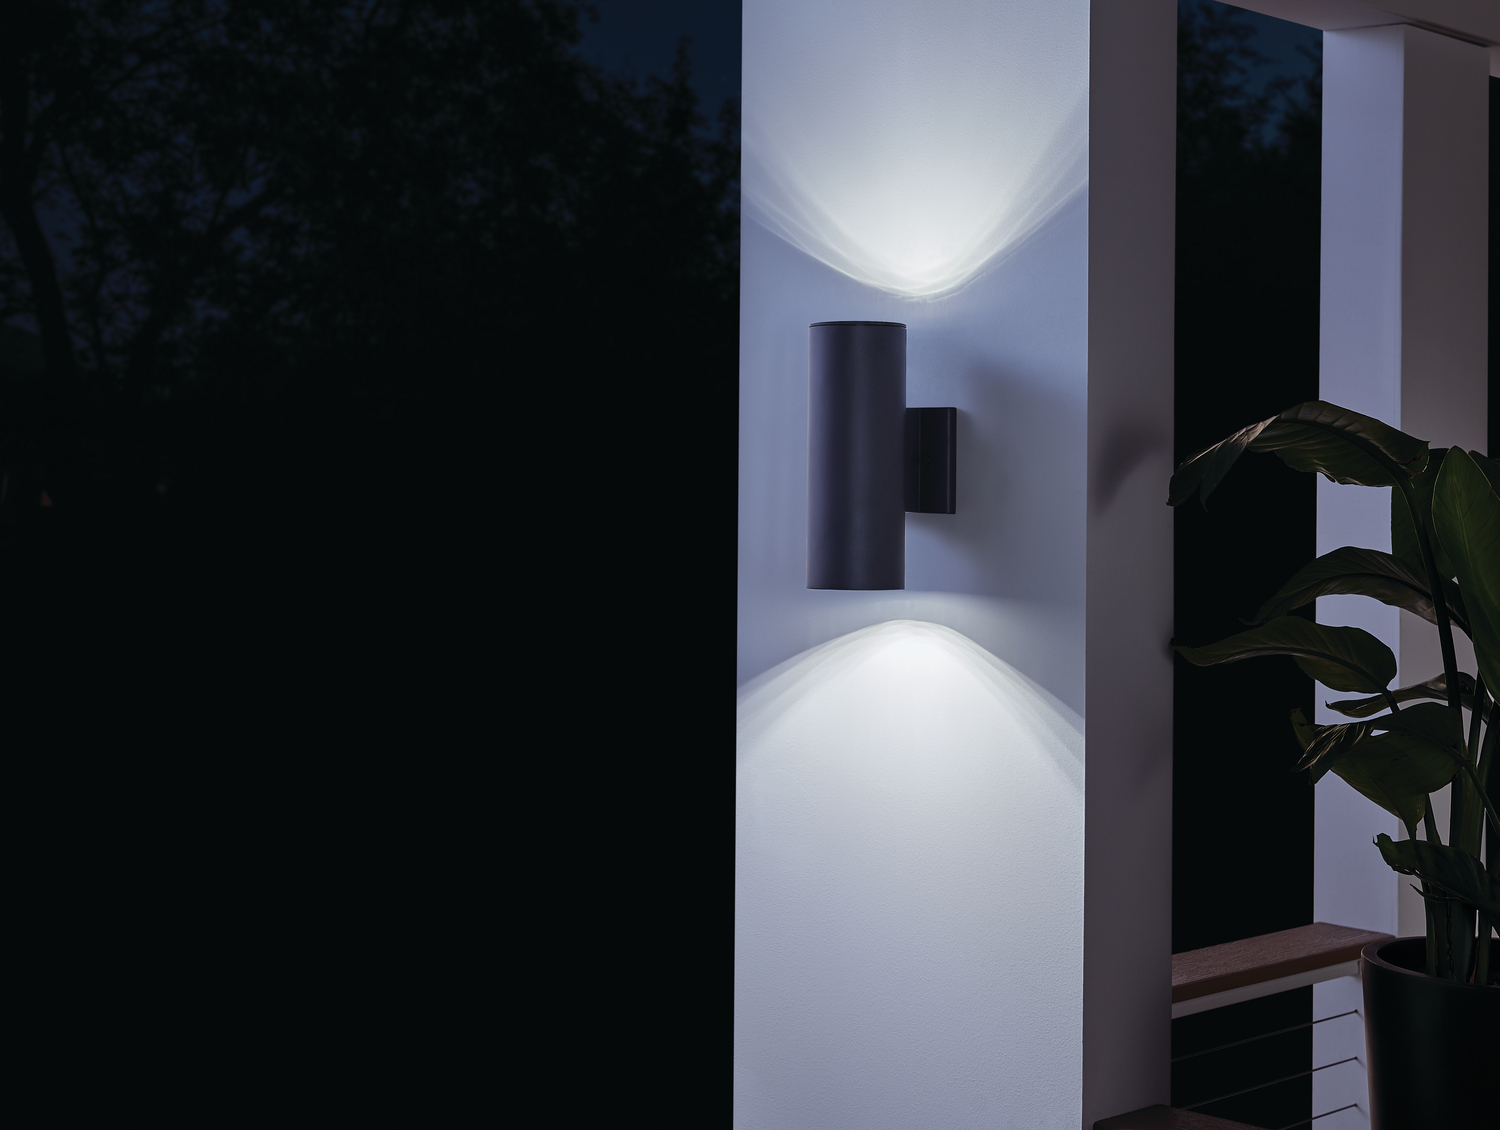 Kichler 12" 1 Light Integrated LED Textured Black Cylinder Outdoor Wall Sconce - image 5 of 7